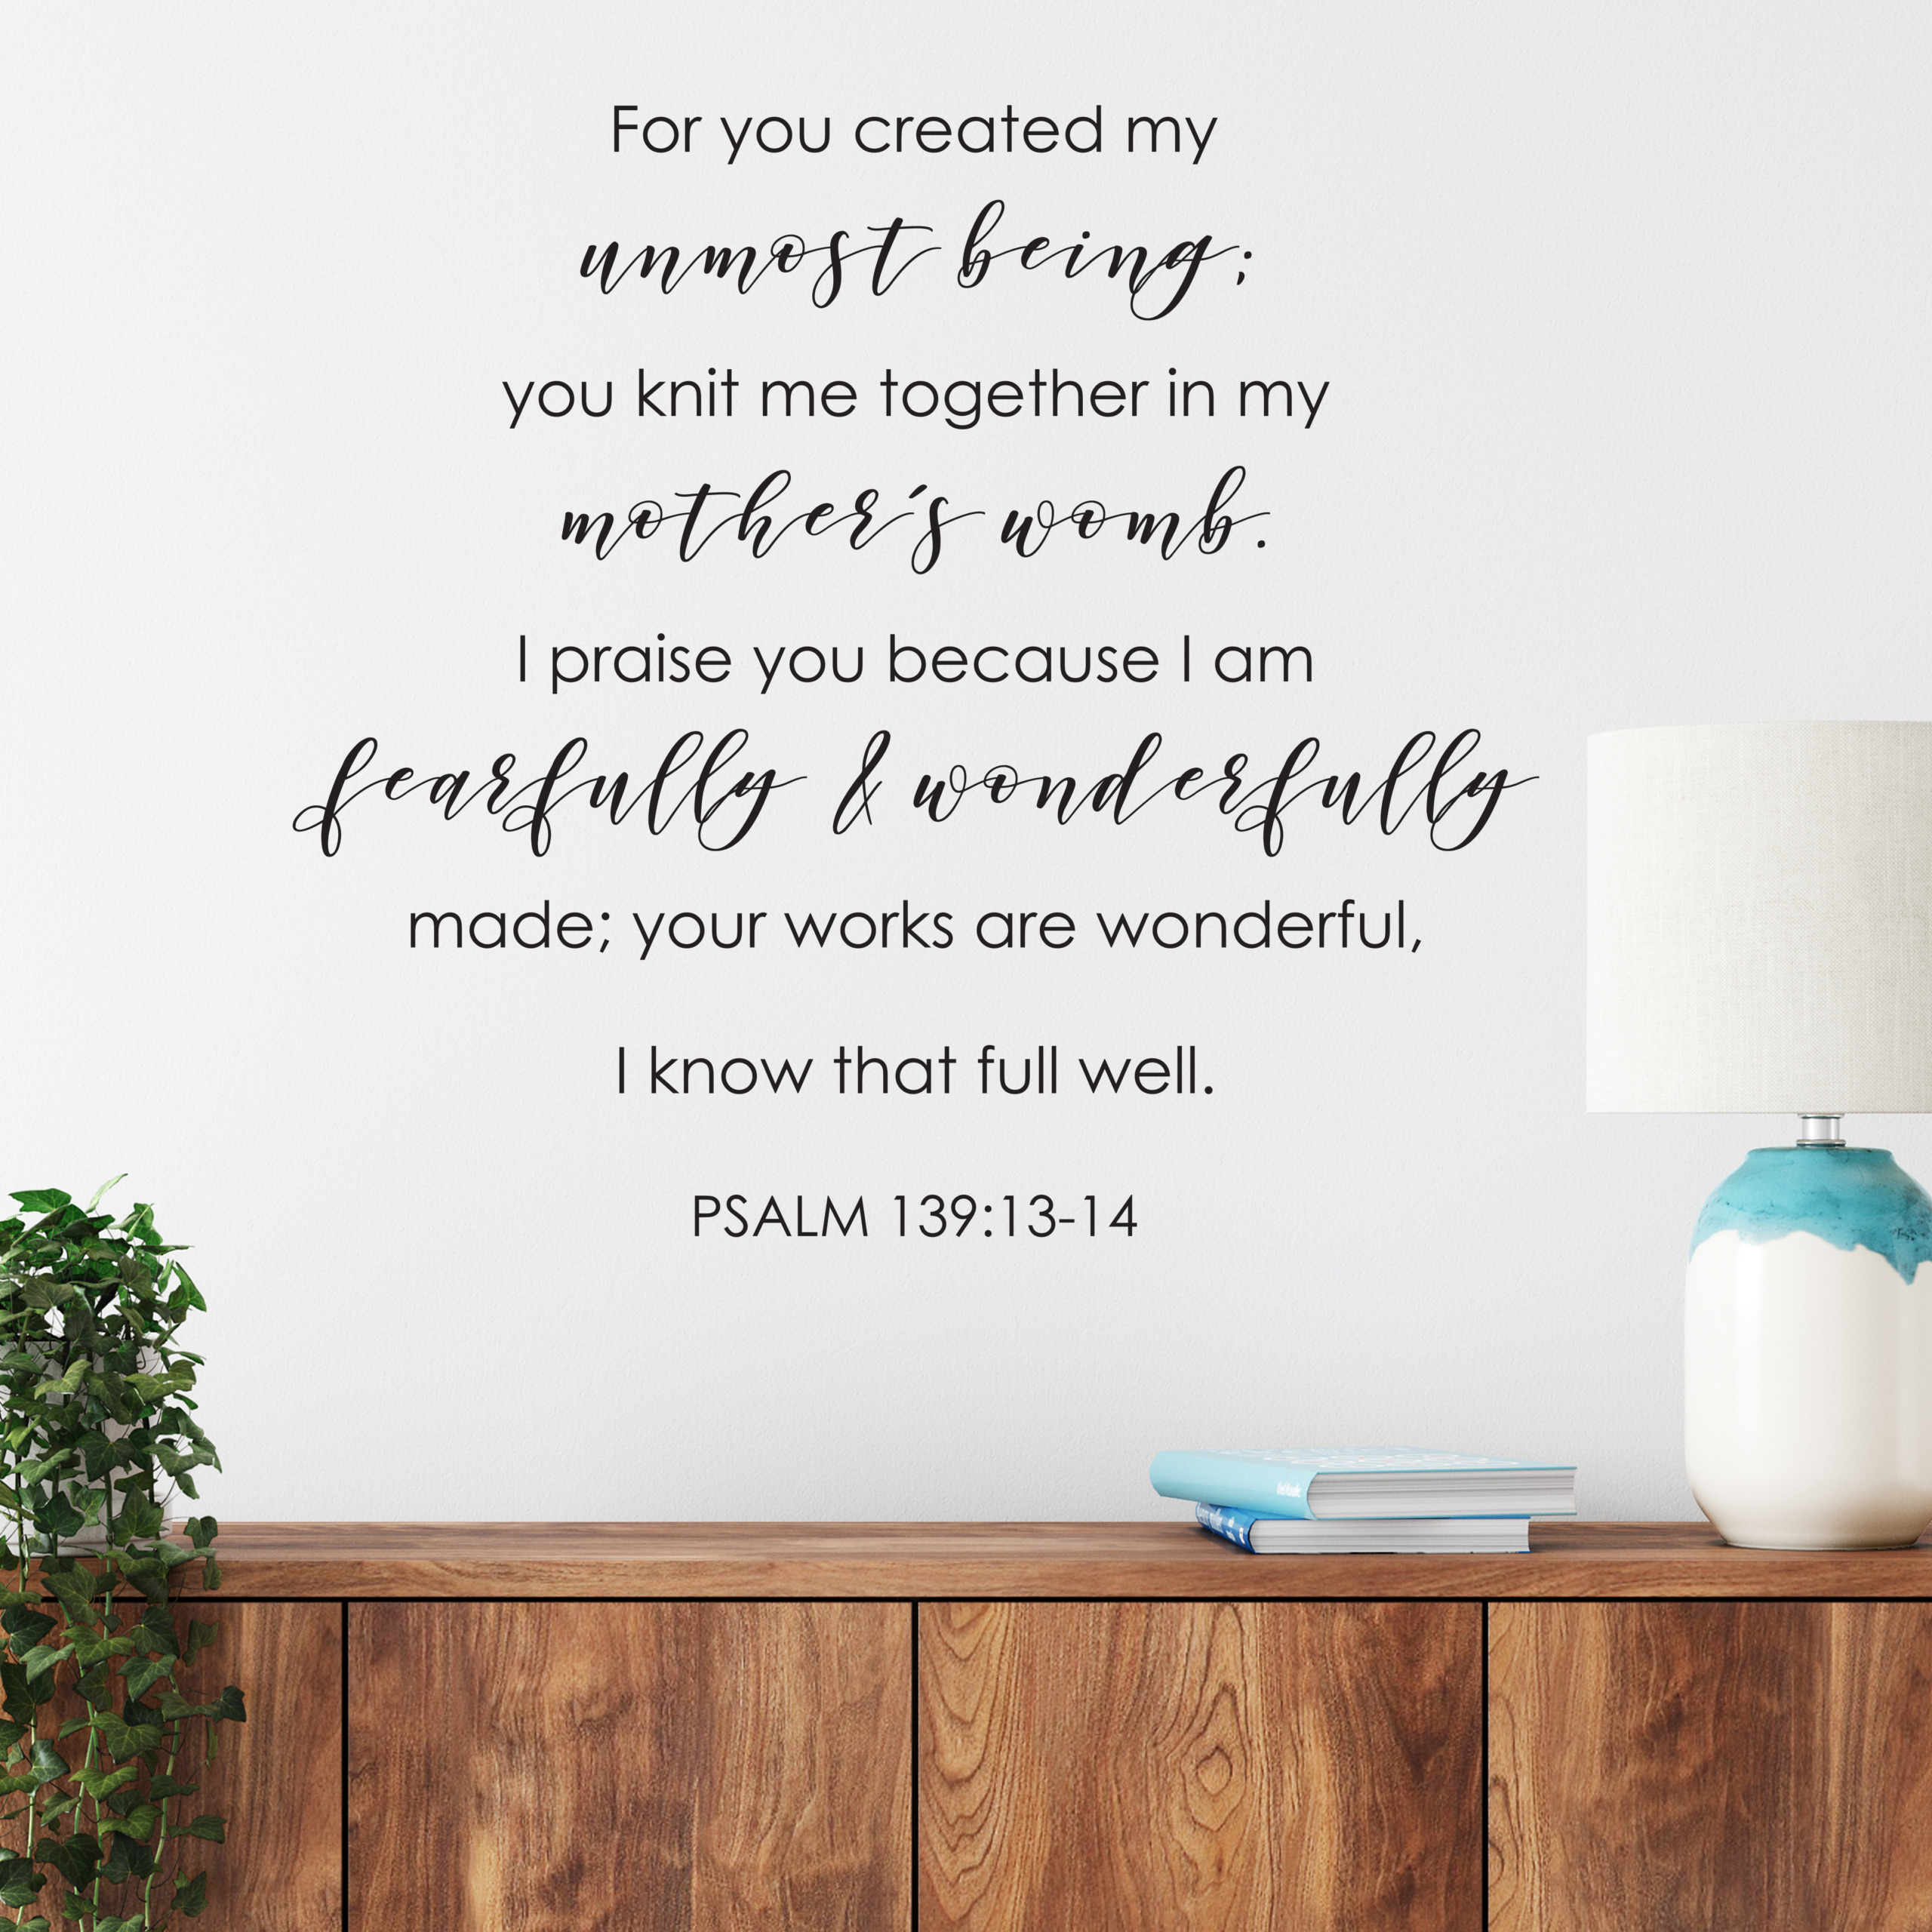 I Am Fearfully Made Bible Verse Wall Art Psalm 139:14 Christian Wall Decor, Religious Wall Decor, Inspirational and Biblical Gifts, Children Flying Kite in Sunset Poster, 11x14 Unframed Art Print